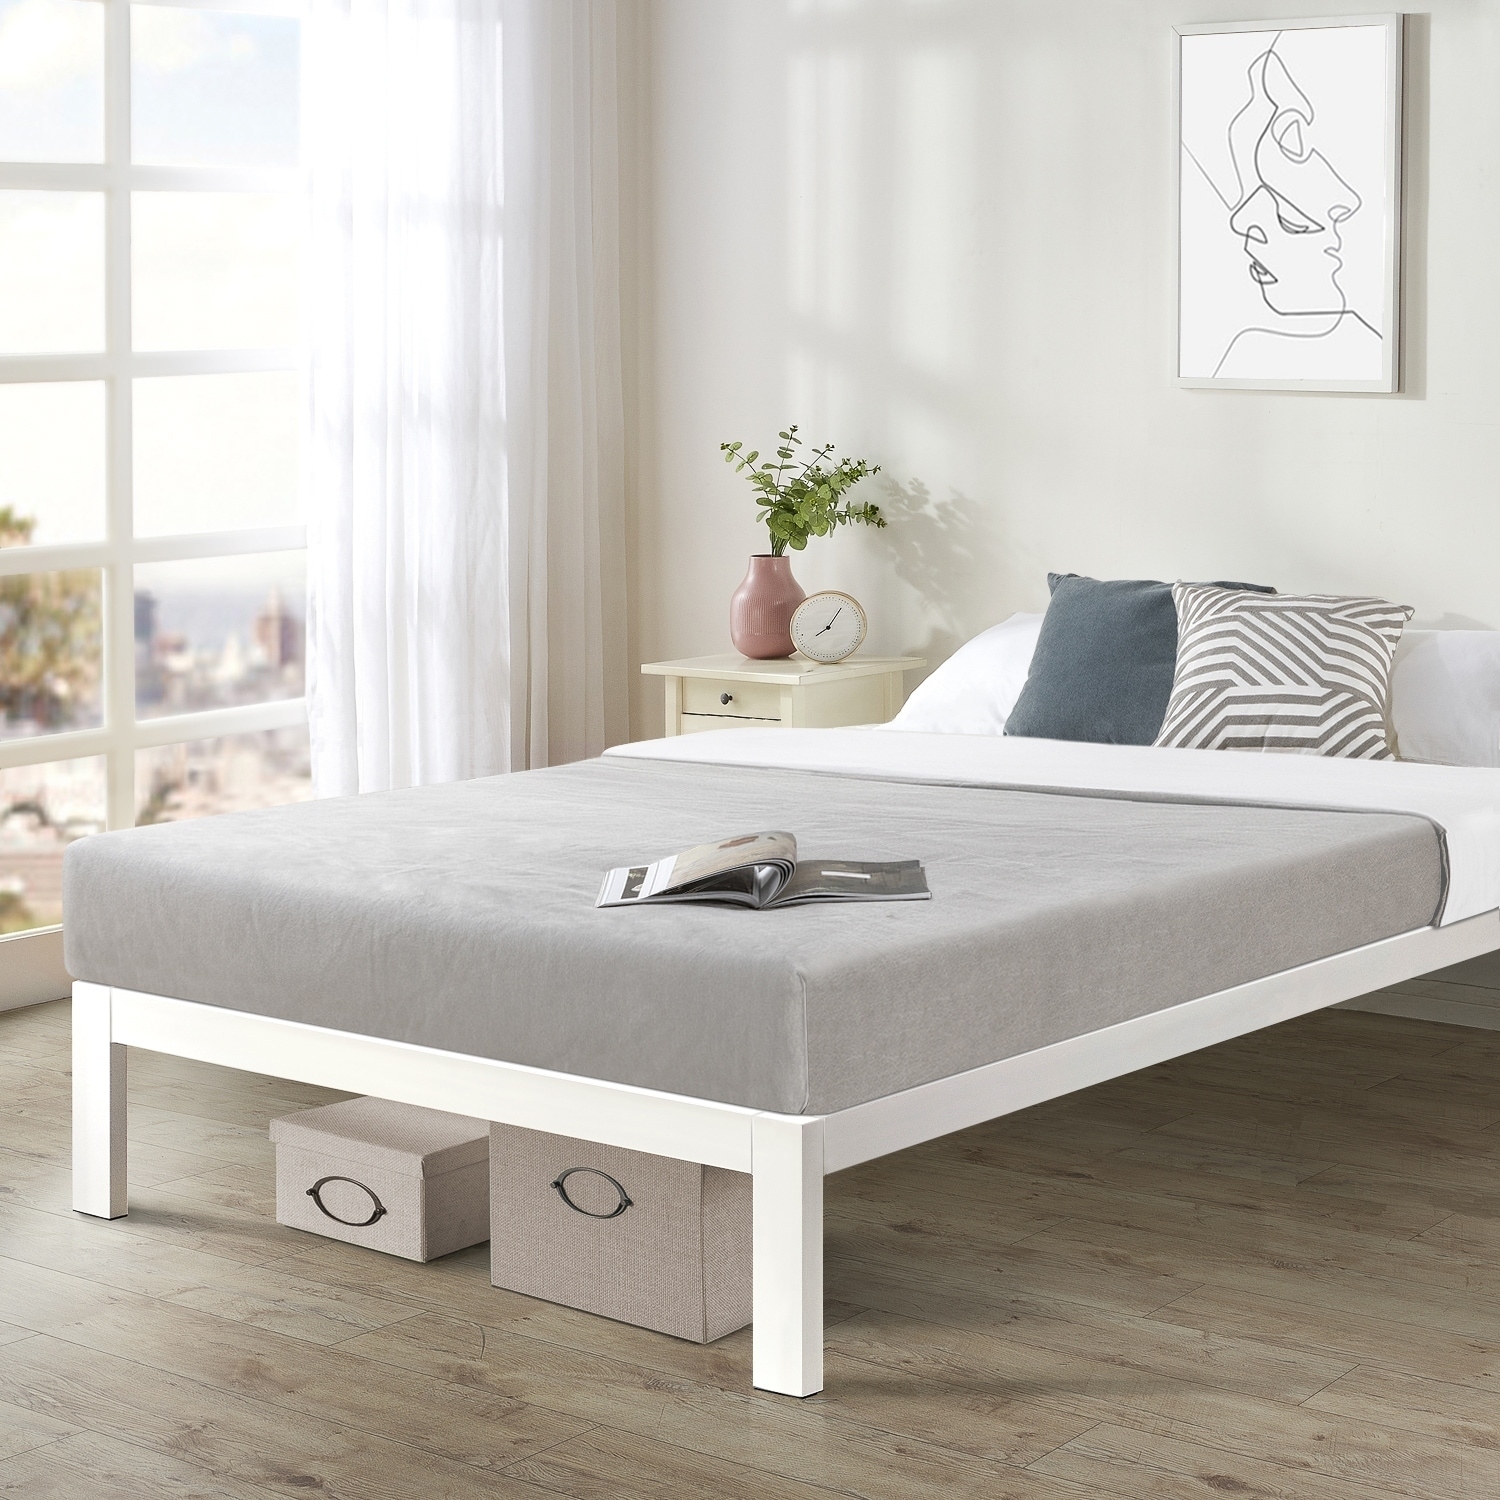 Shop California King Size Bed Frame Heavy Duty Steel Slats Platform Series Titan C White Crown Comfort On Sale Overstock 20859134,How To Make An Omelette Recipe